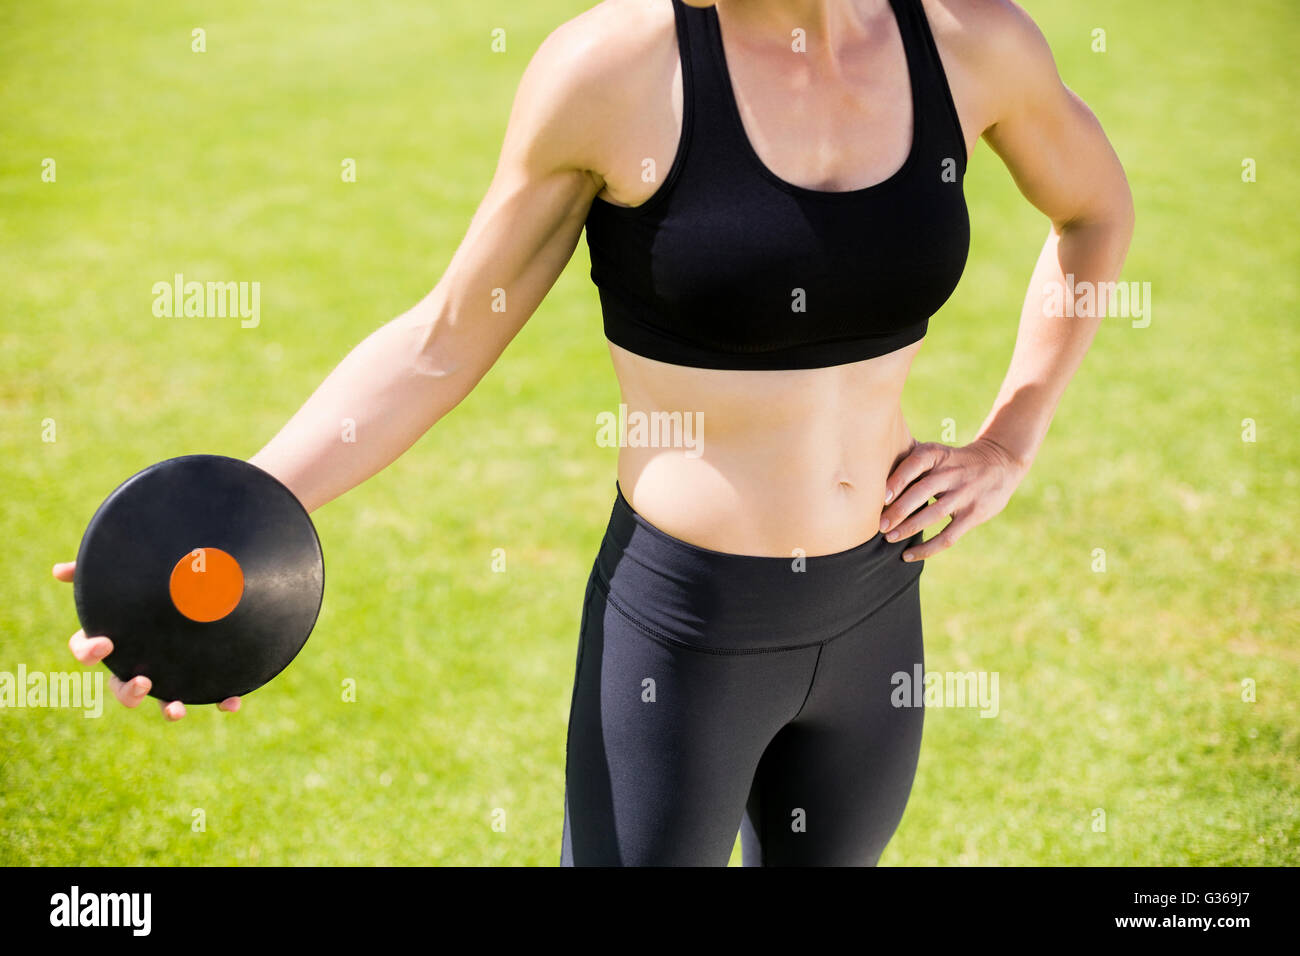 Mid section of female athlete about to throw a discus Stock Photo